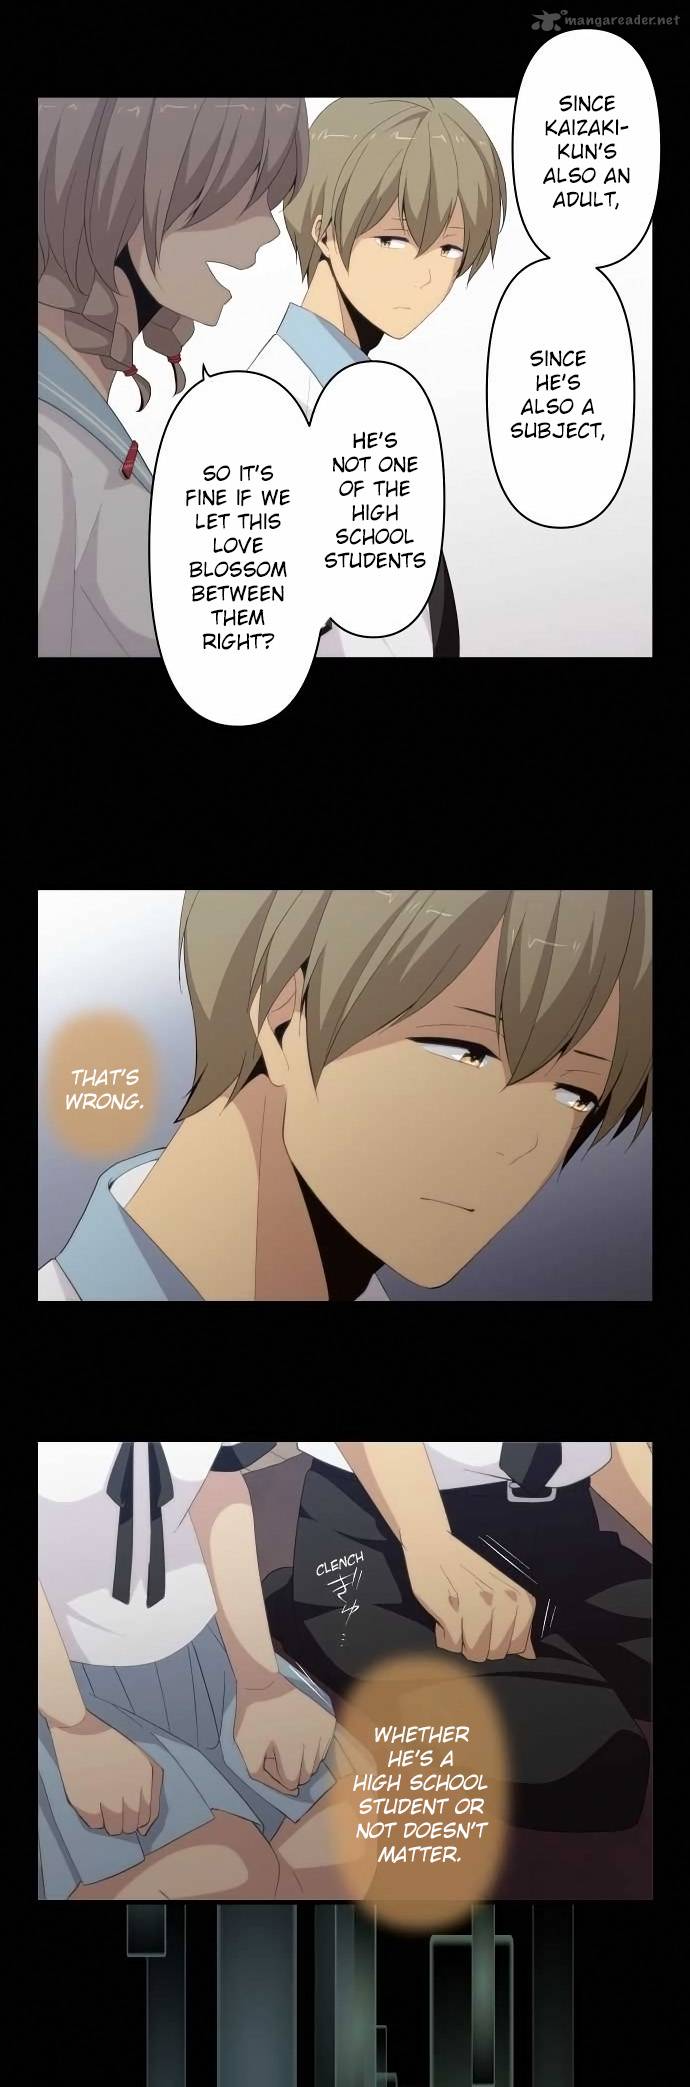 Relife 120 2